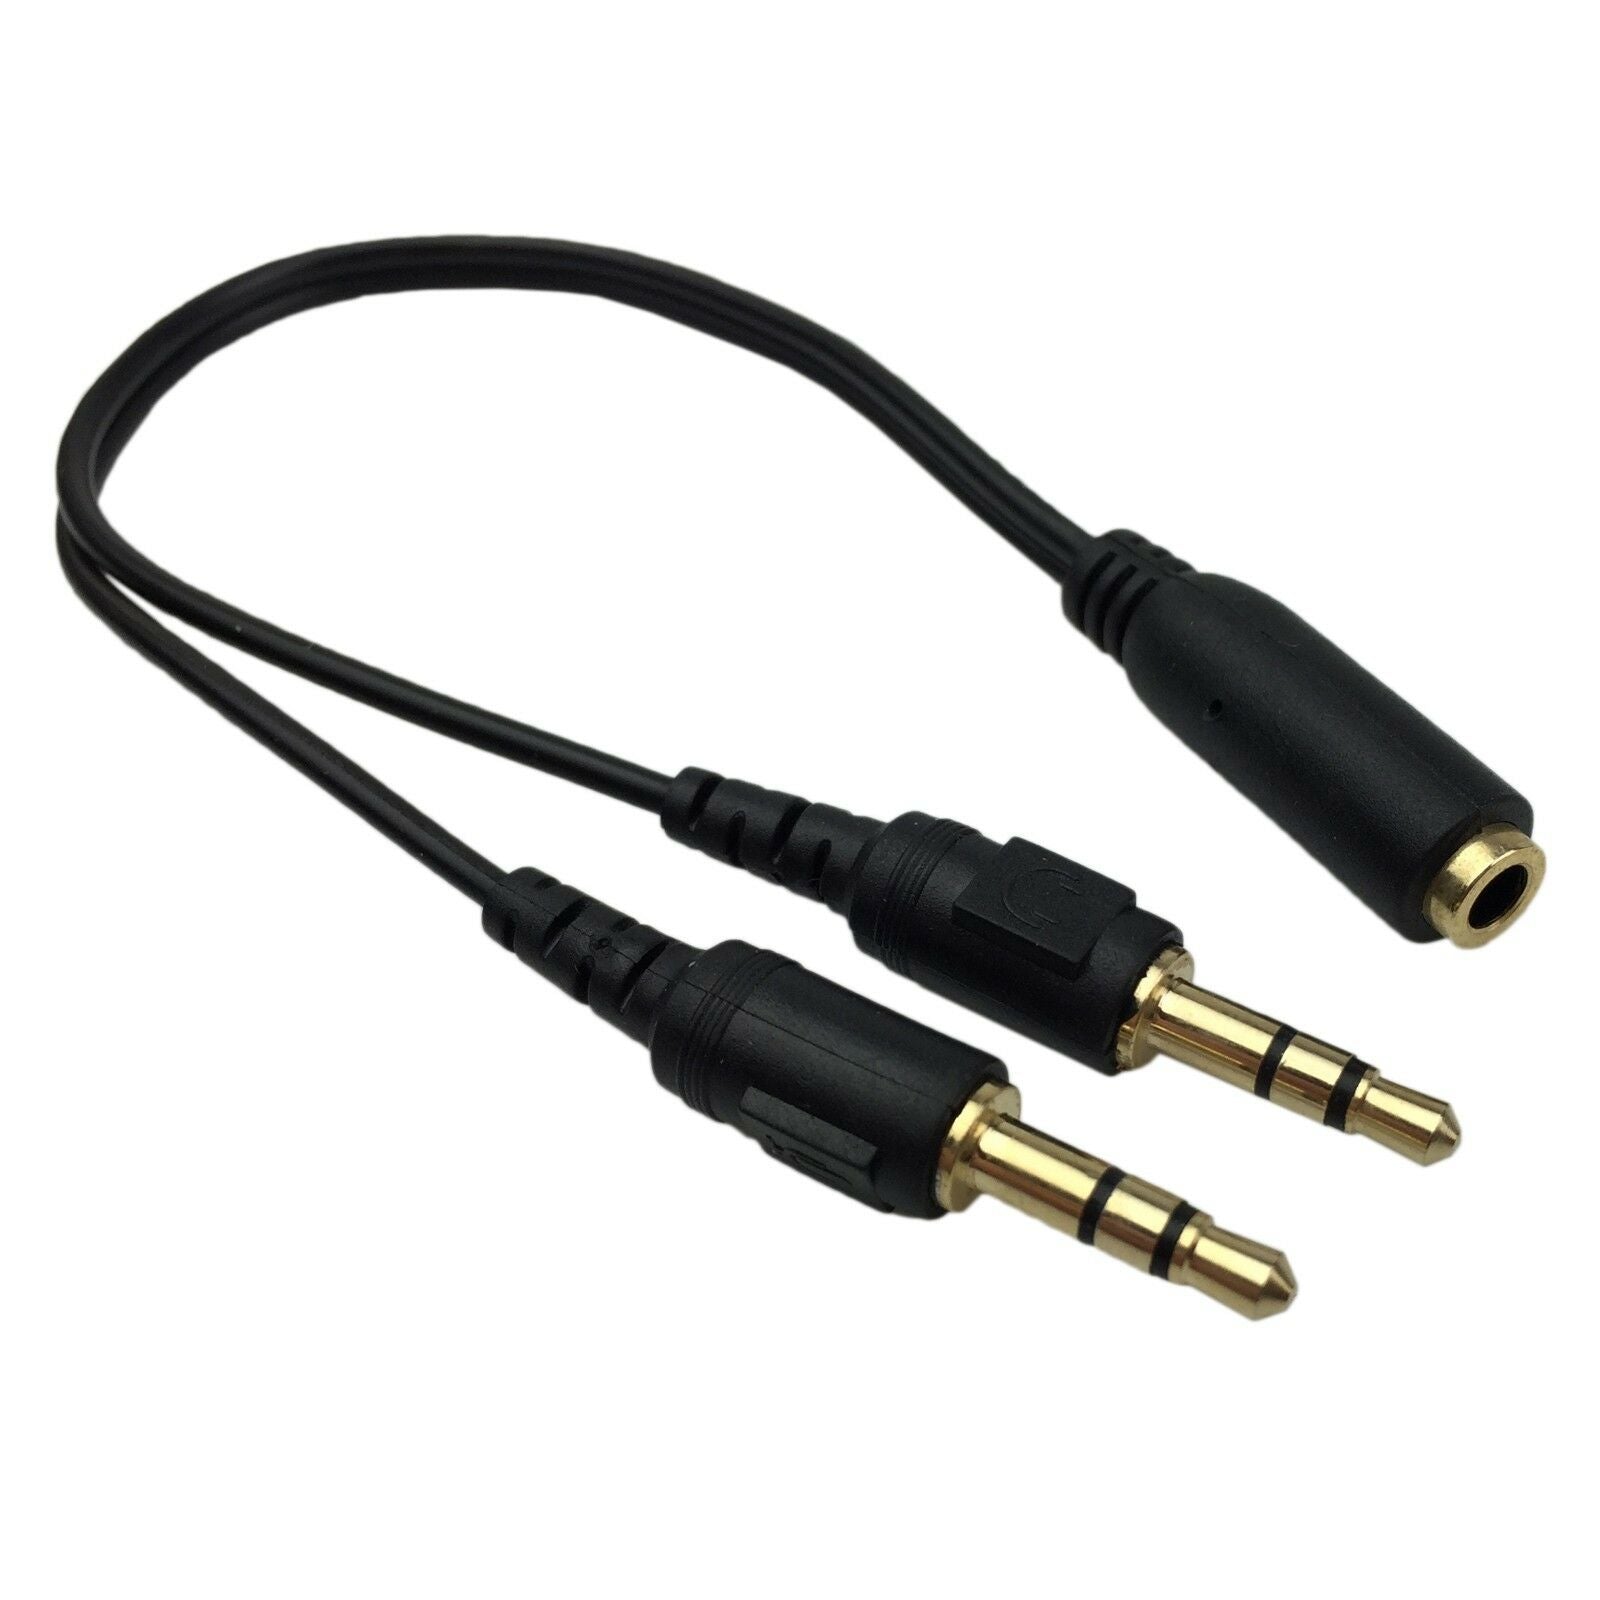 OneOdio 3.5mm AUX Audio Mic Splitter Cable Headphone Earphone Adapter Female to 2 Male